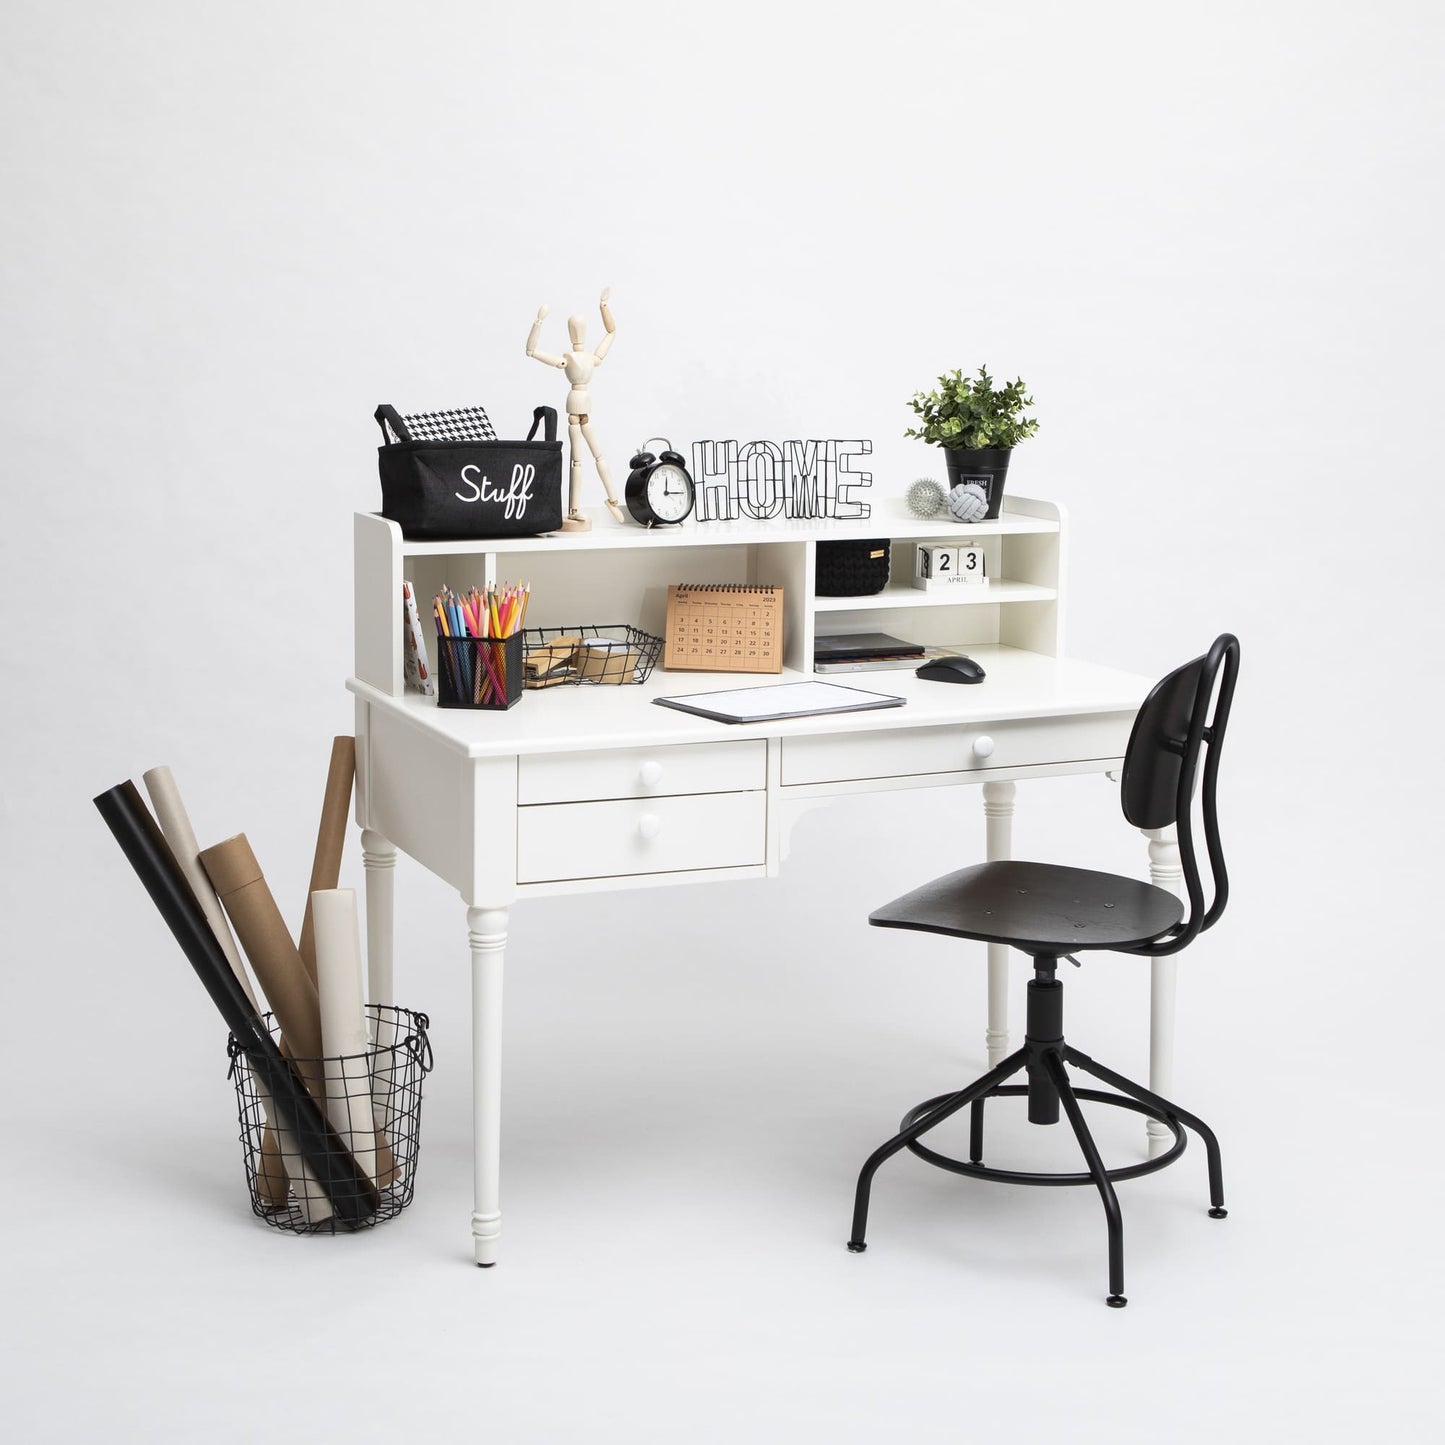 A well-organized white Table with a hutch, Pedestal desk with shelves, a laptop, decorative items, and a black chair against a plain background.